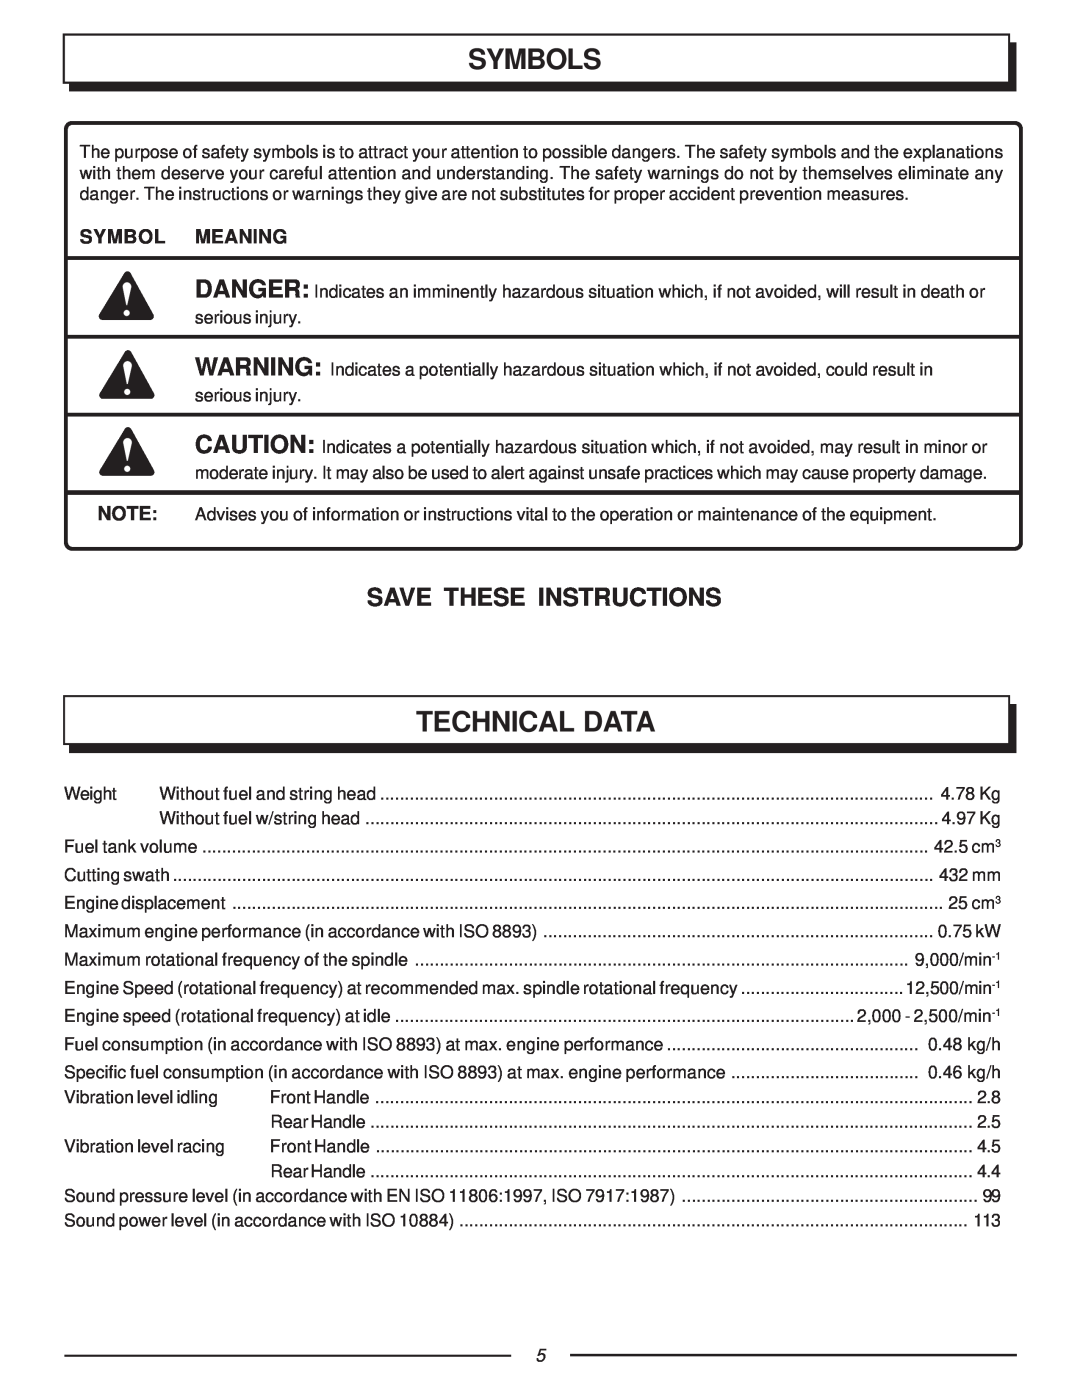 Homelite UT70123, F2035 manual Technical Data, Symbols, Save These Instructions, Symbol Meaning 